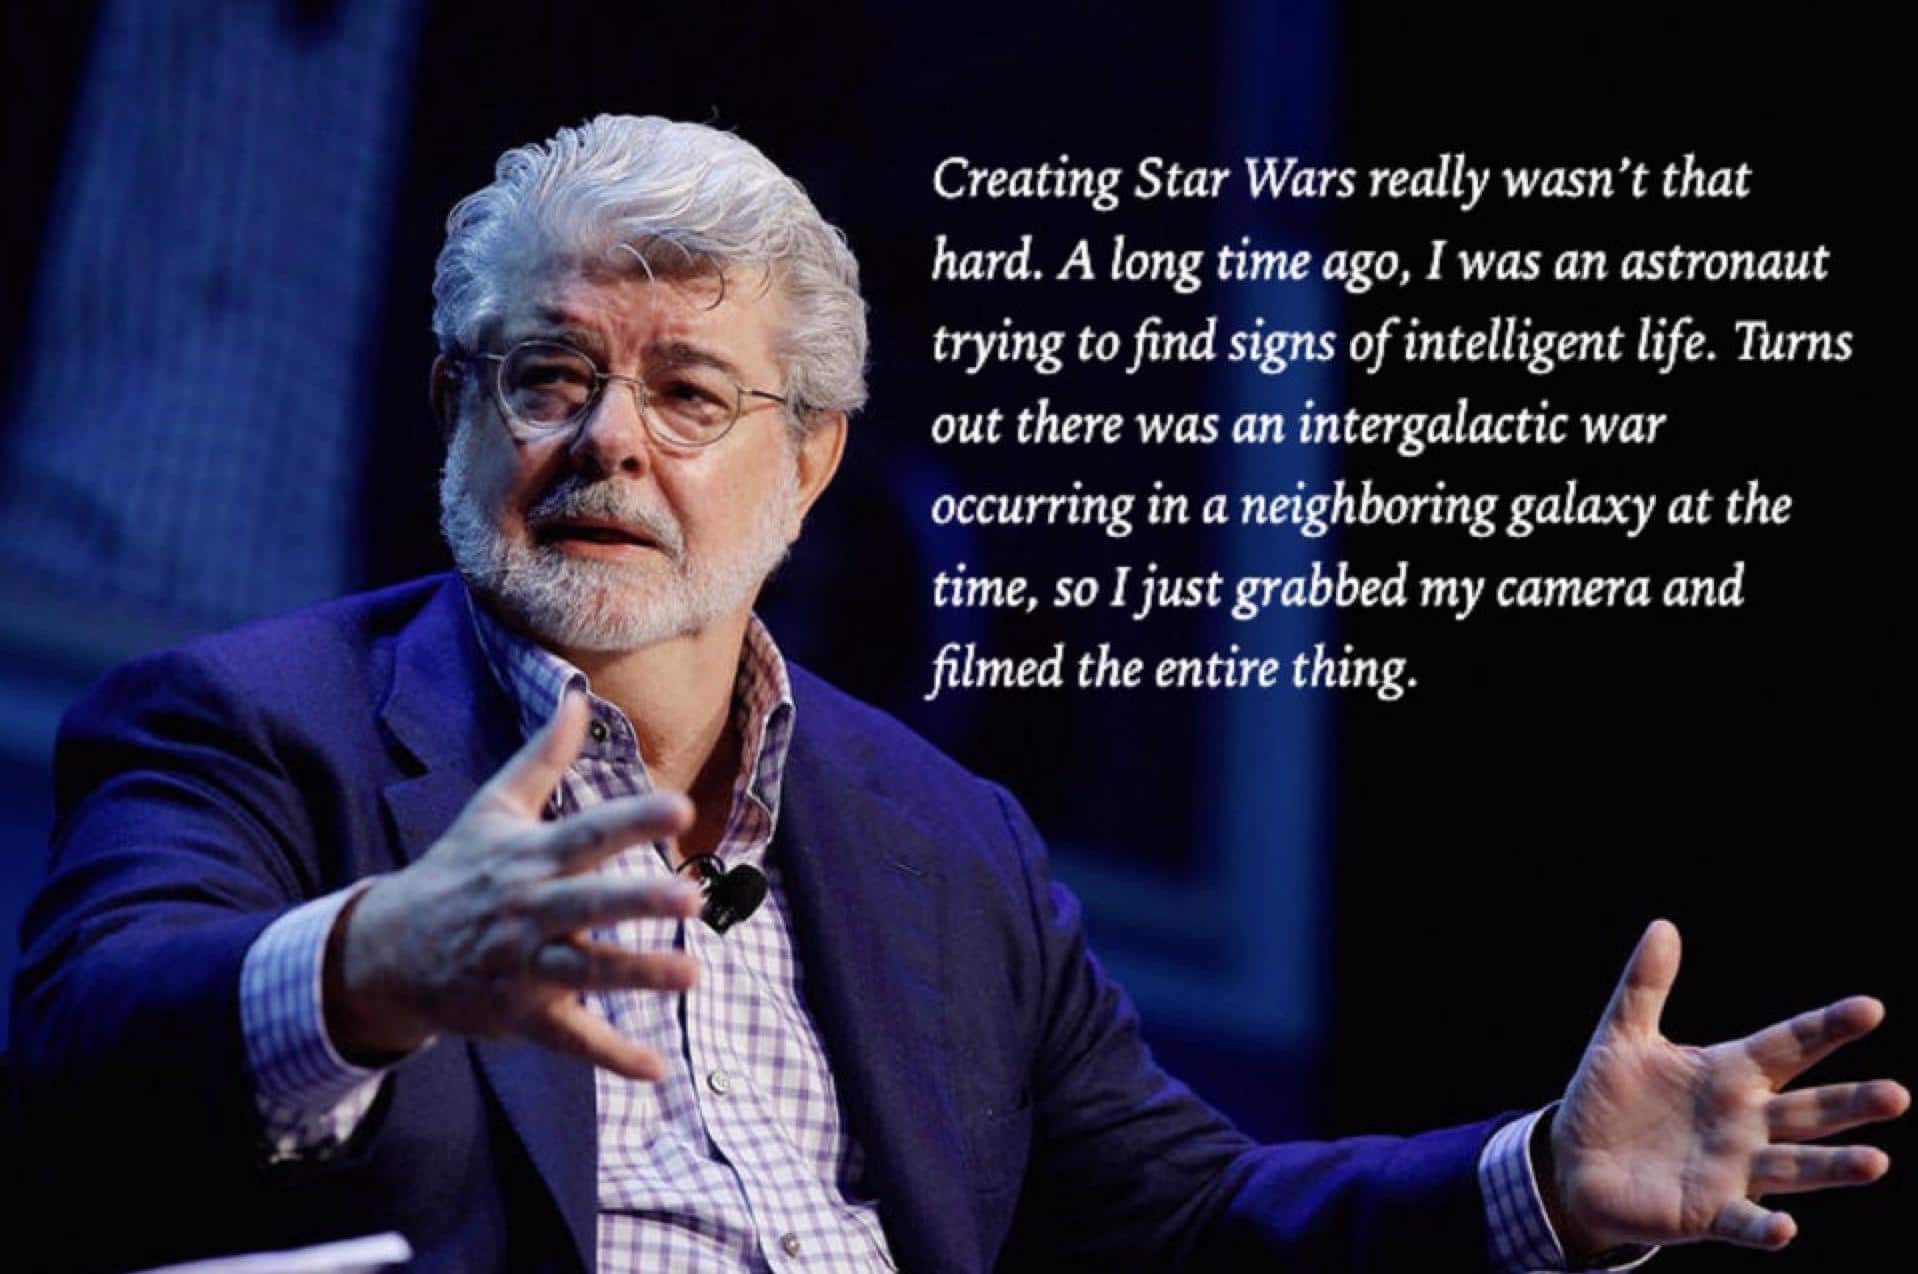 Prequel-memes, George Lucas, George, Star Wars, Obi Wan, Lucas Star Wars Memes Prequel-memes, George Lucas, George, Star Wars, Obi Wan, Lucas text: Creating Star Wars really wasn't that hard. A long time ago, I was an astronaut trying tofind signs of intelligent life. Turns out there was an intergalactic war occurring in a neighboring galaxy at the time, so I just grabbed my camera and filmed the entire thing. 